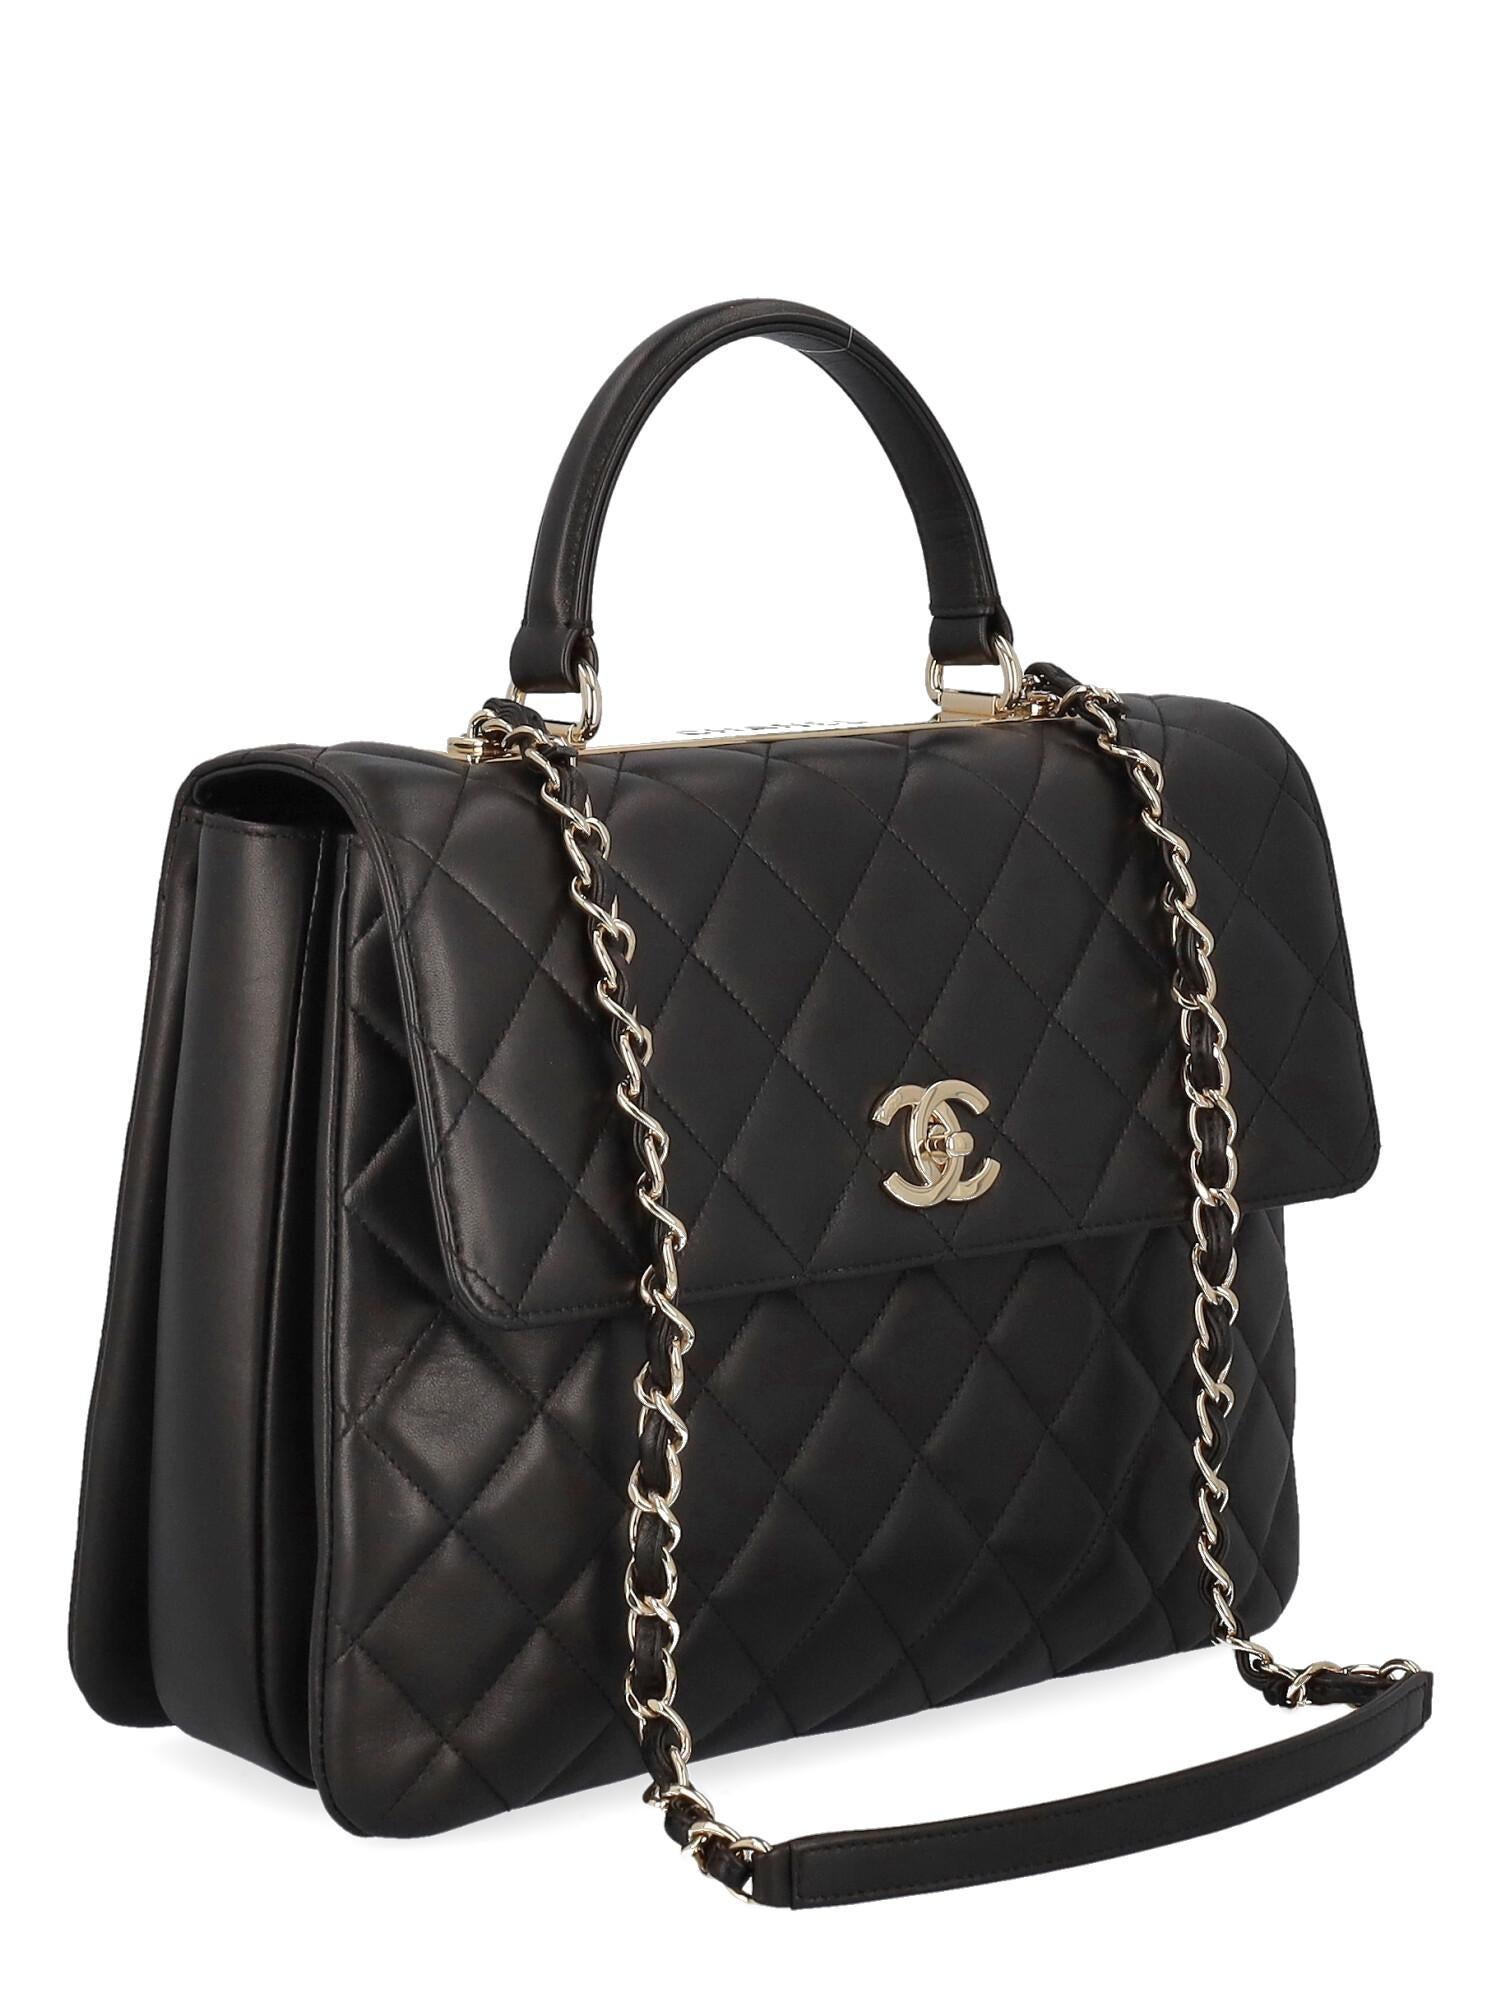 Chanel Women Shoulder bags Black Leather  In Excellent Condition For Sale In Milan, IT